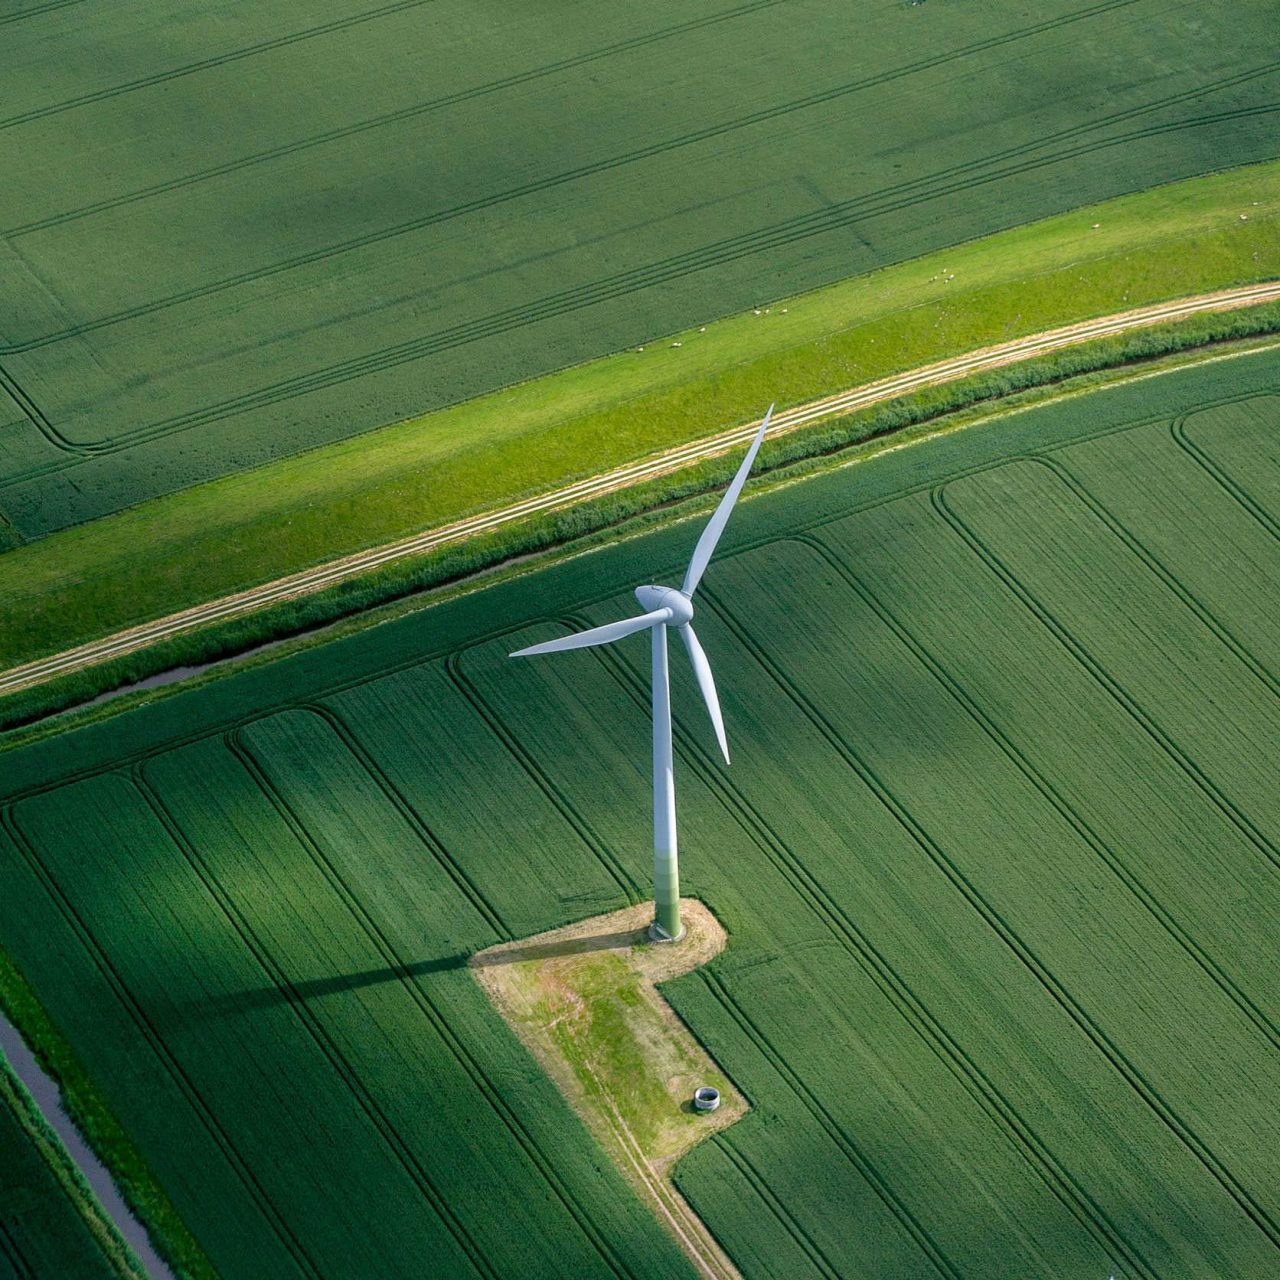 birdview of a windmill to imply sustainable investing concept